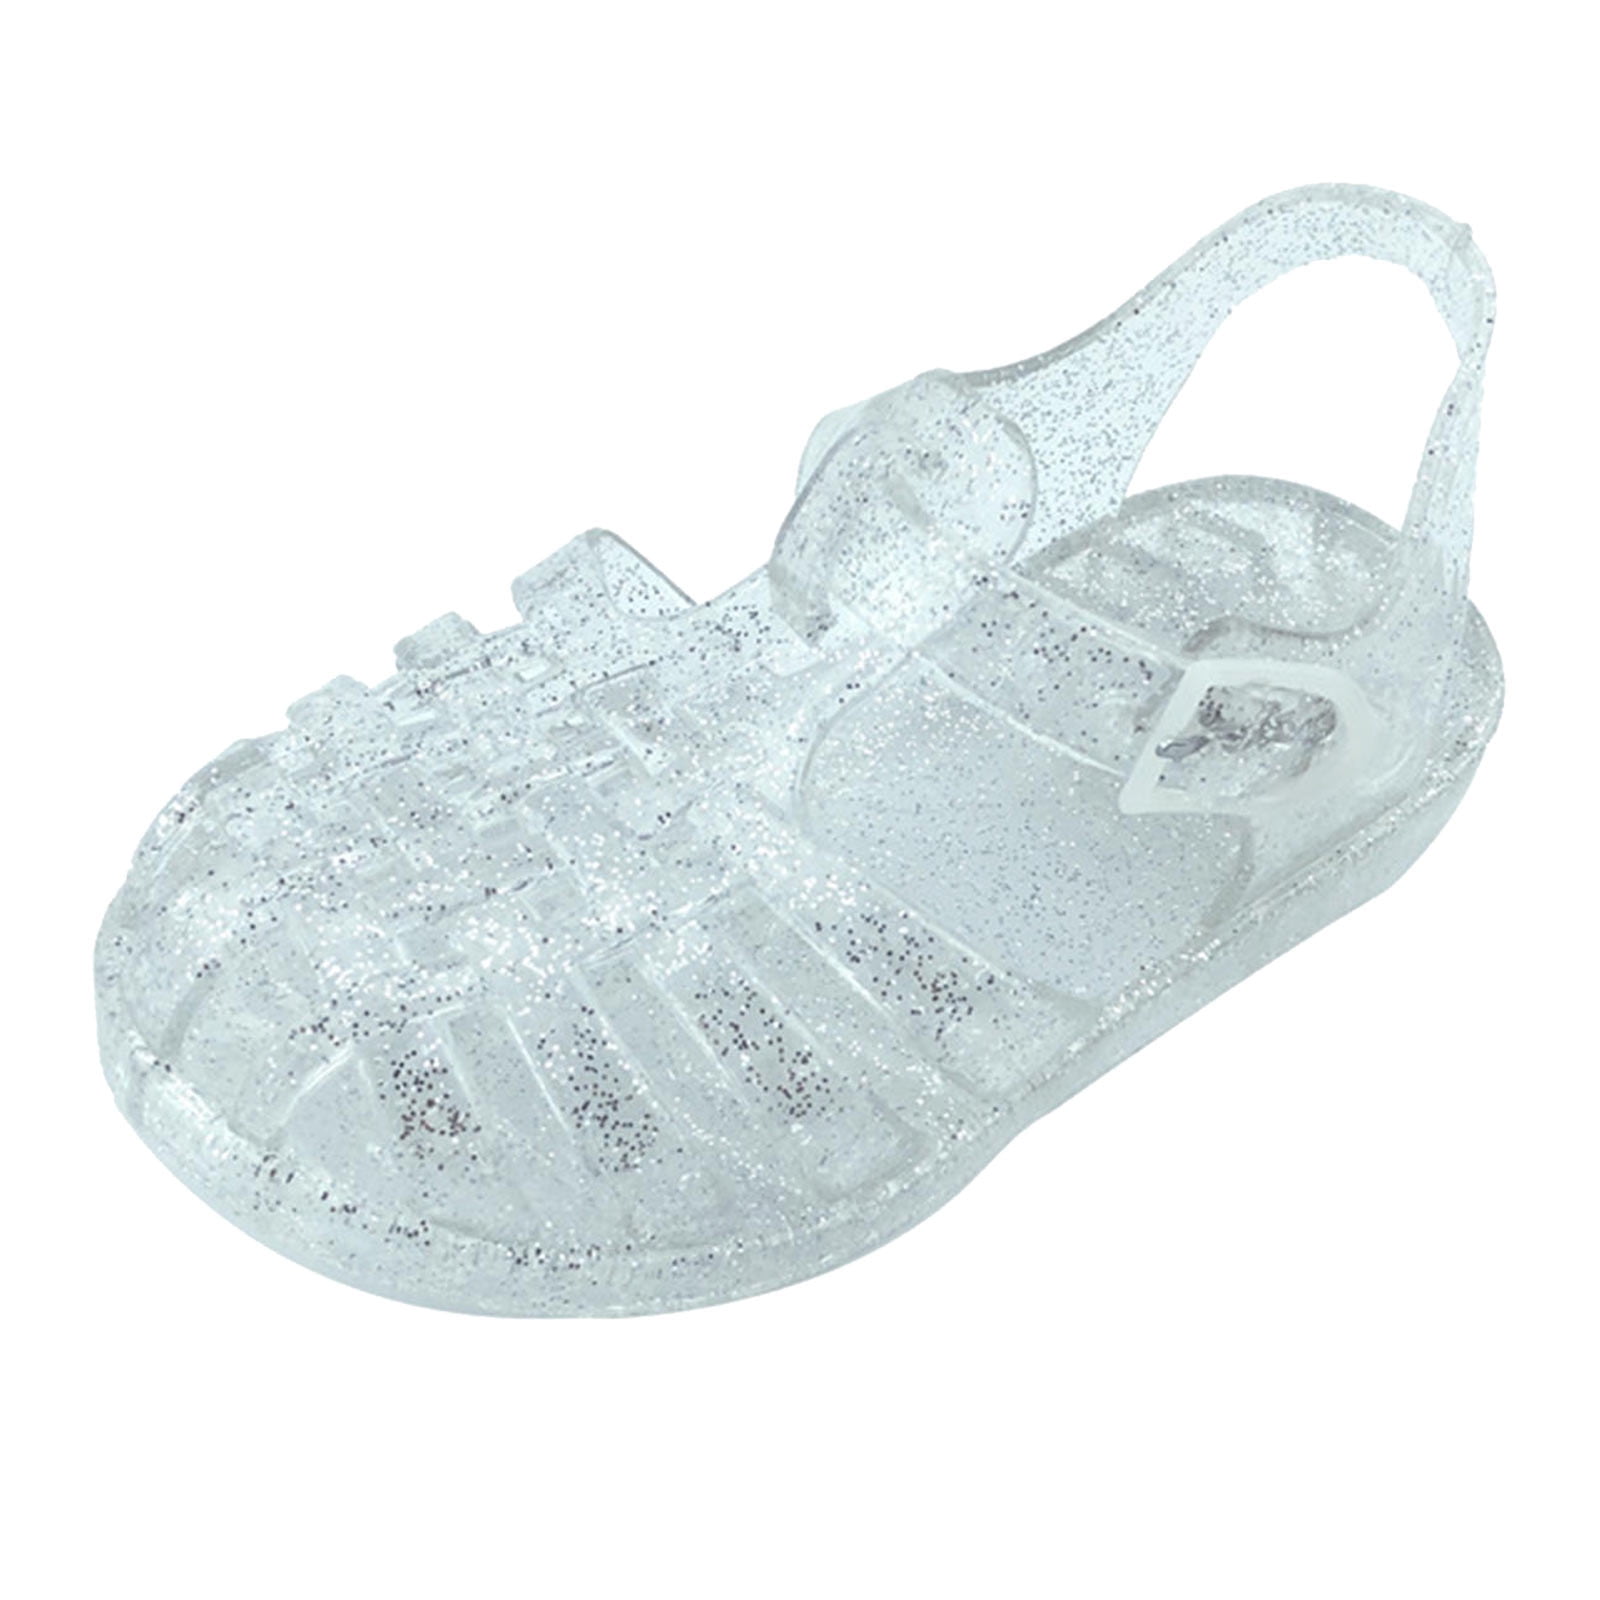 VerPetridure Kids Sandals Clearance Under $10 Toddler Shoes Baby Girls ...